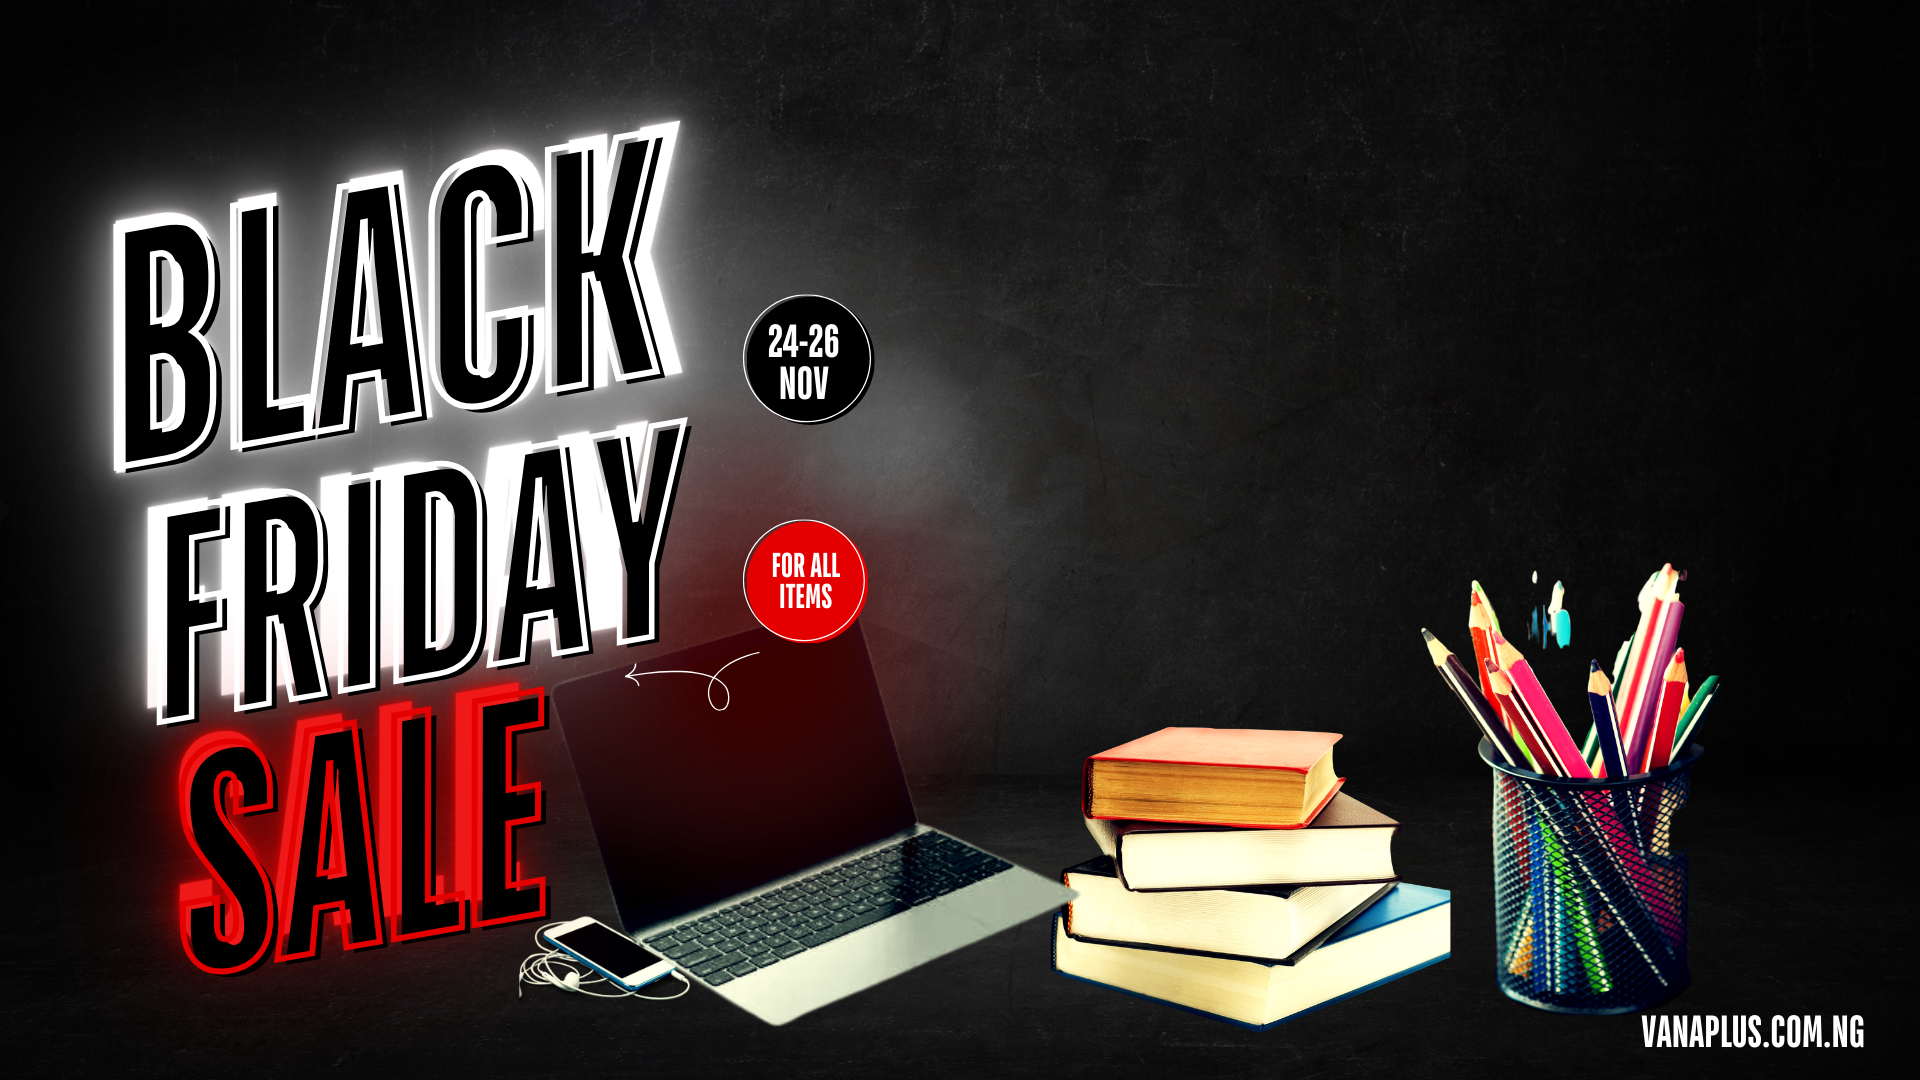 Ready, Set, Shop! Get the Best Stationery & Gadgets On Black Friday